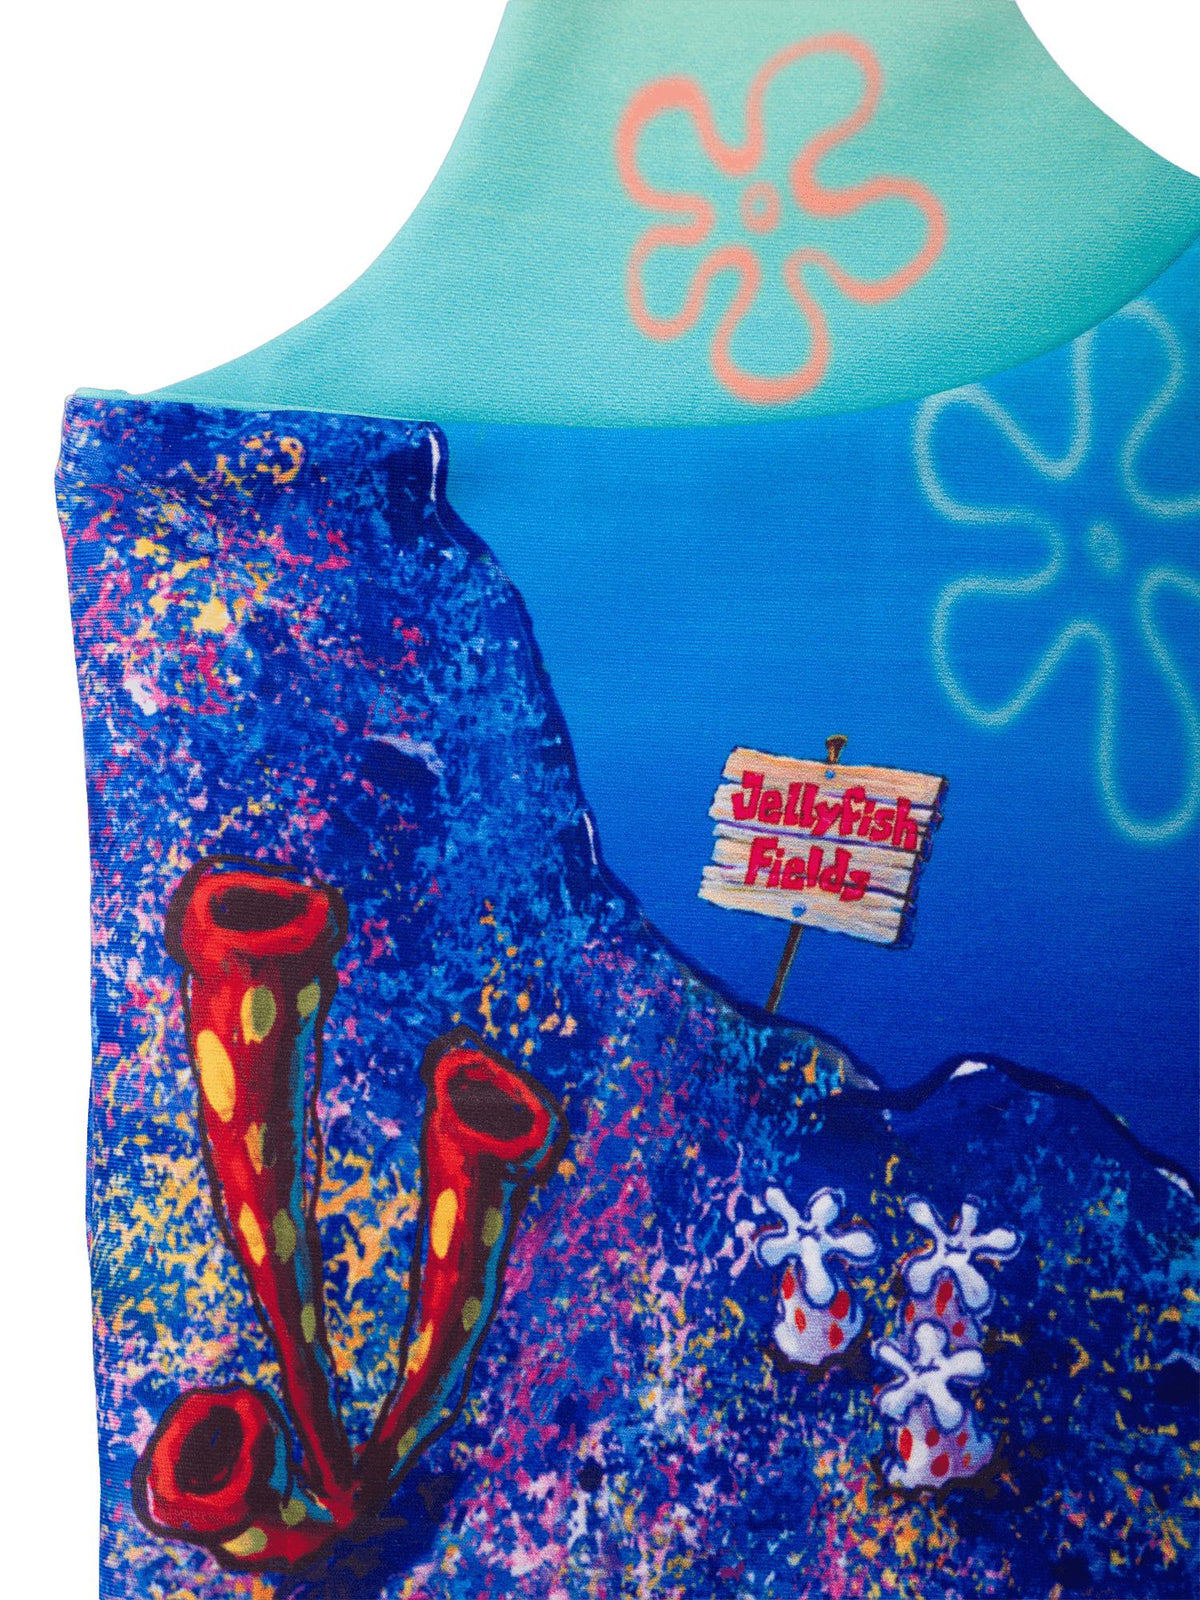 Close up detail image showing the back left of the SpongeBob top with Jellyfish Fields sign.